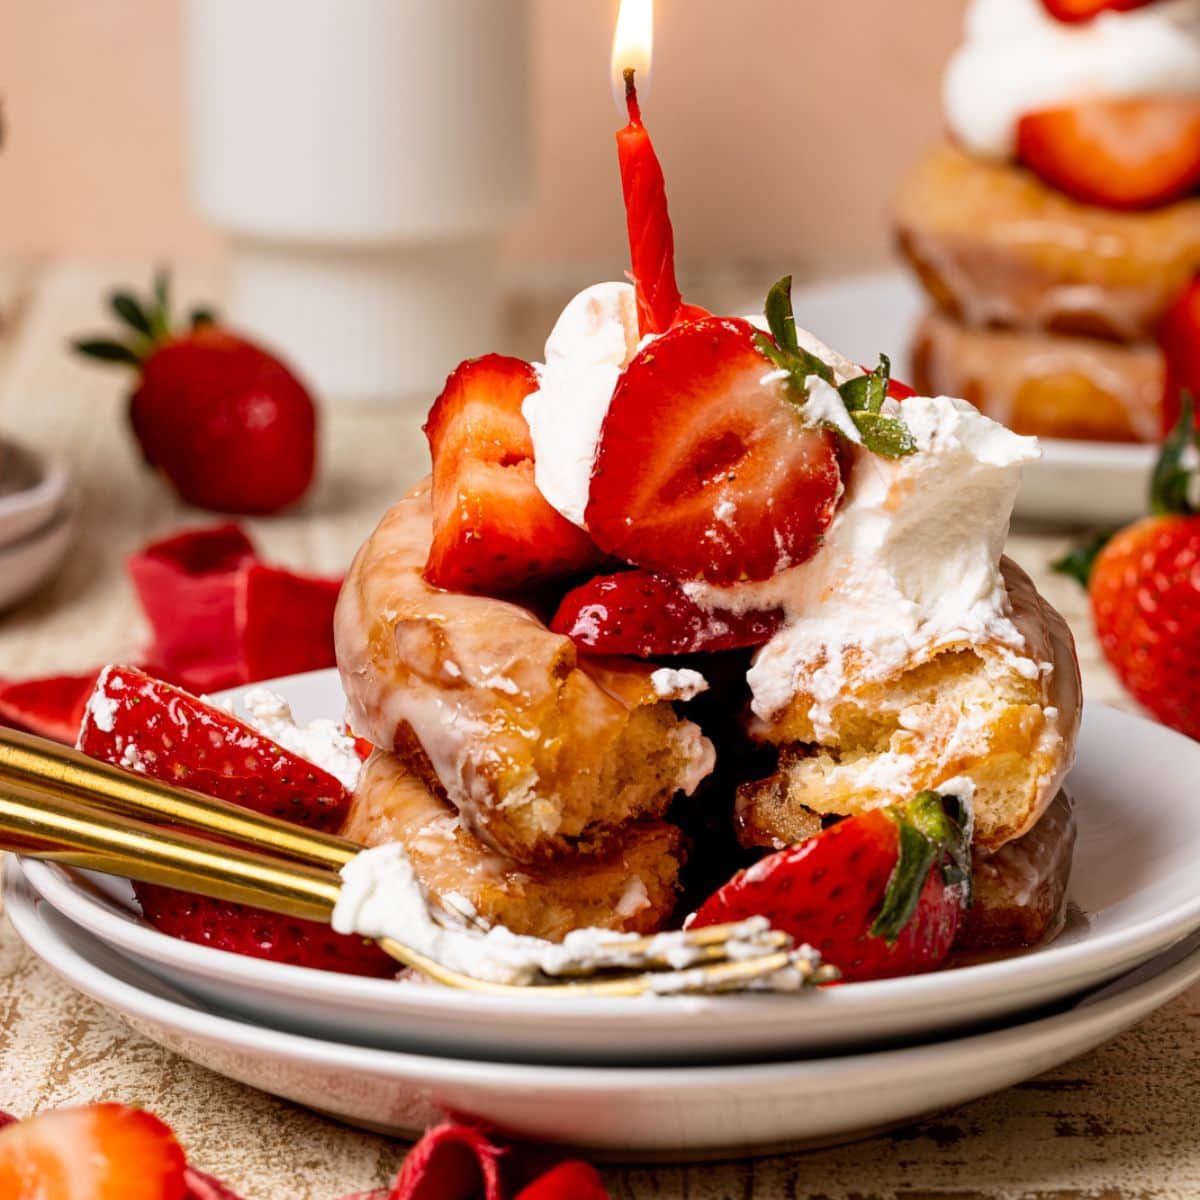 Red candle in a stack of strawberry shortcake donuts on white plates.